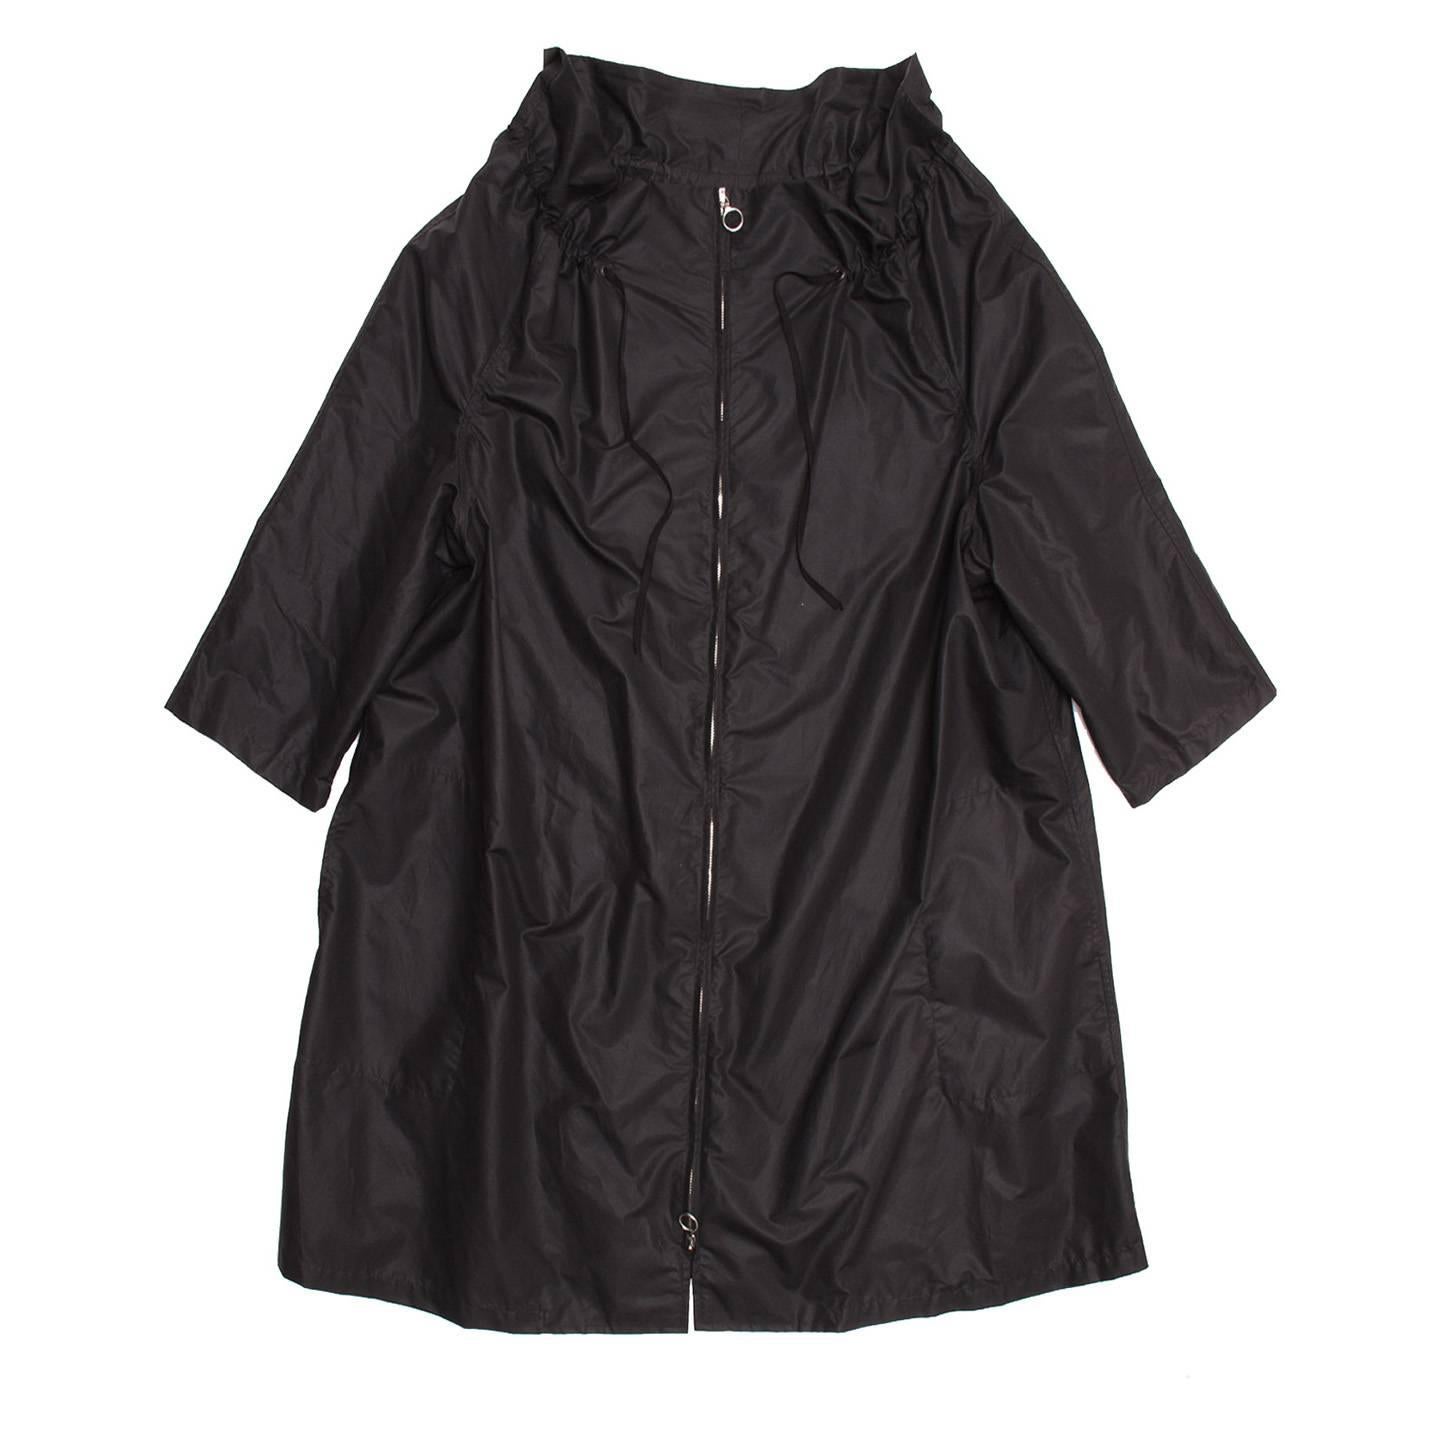 Lanvin 2008. Loose fit knee length black nylon raincoat with wide drawstring collar, 3/4 sleeves and silver metal open-ended zipper at front.

Size  42 French sizing

Condition  Excellent: never worn